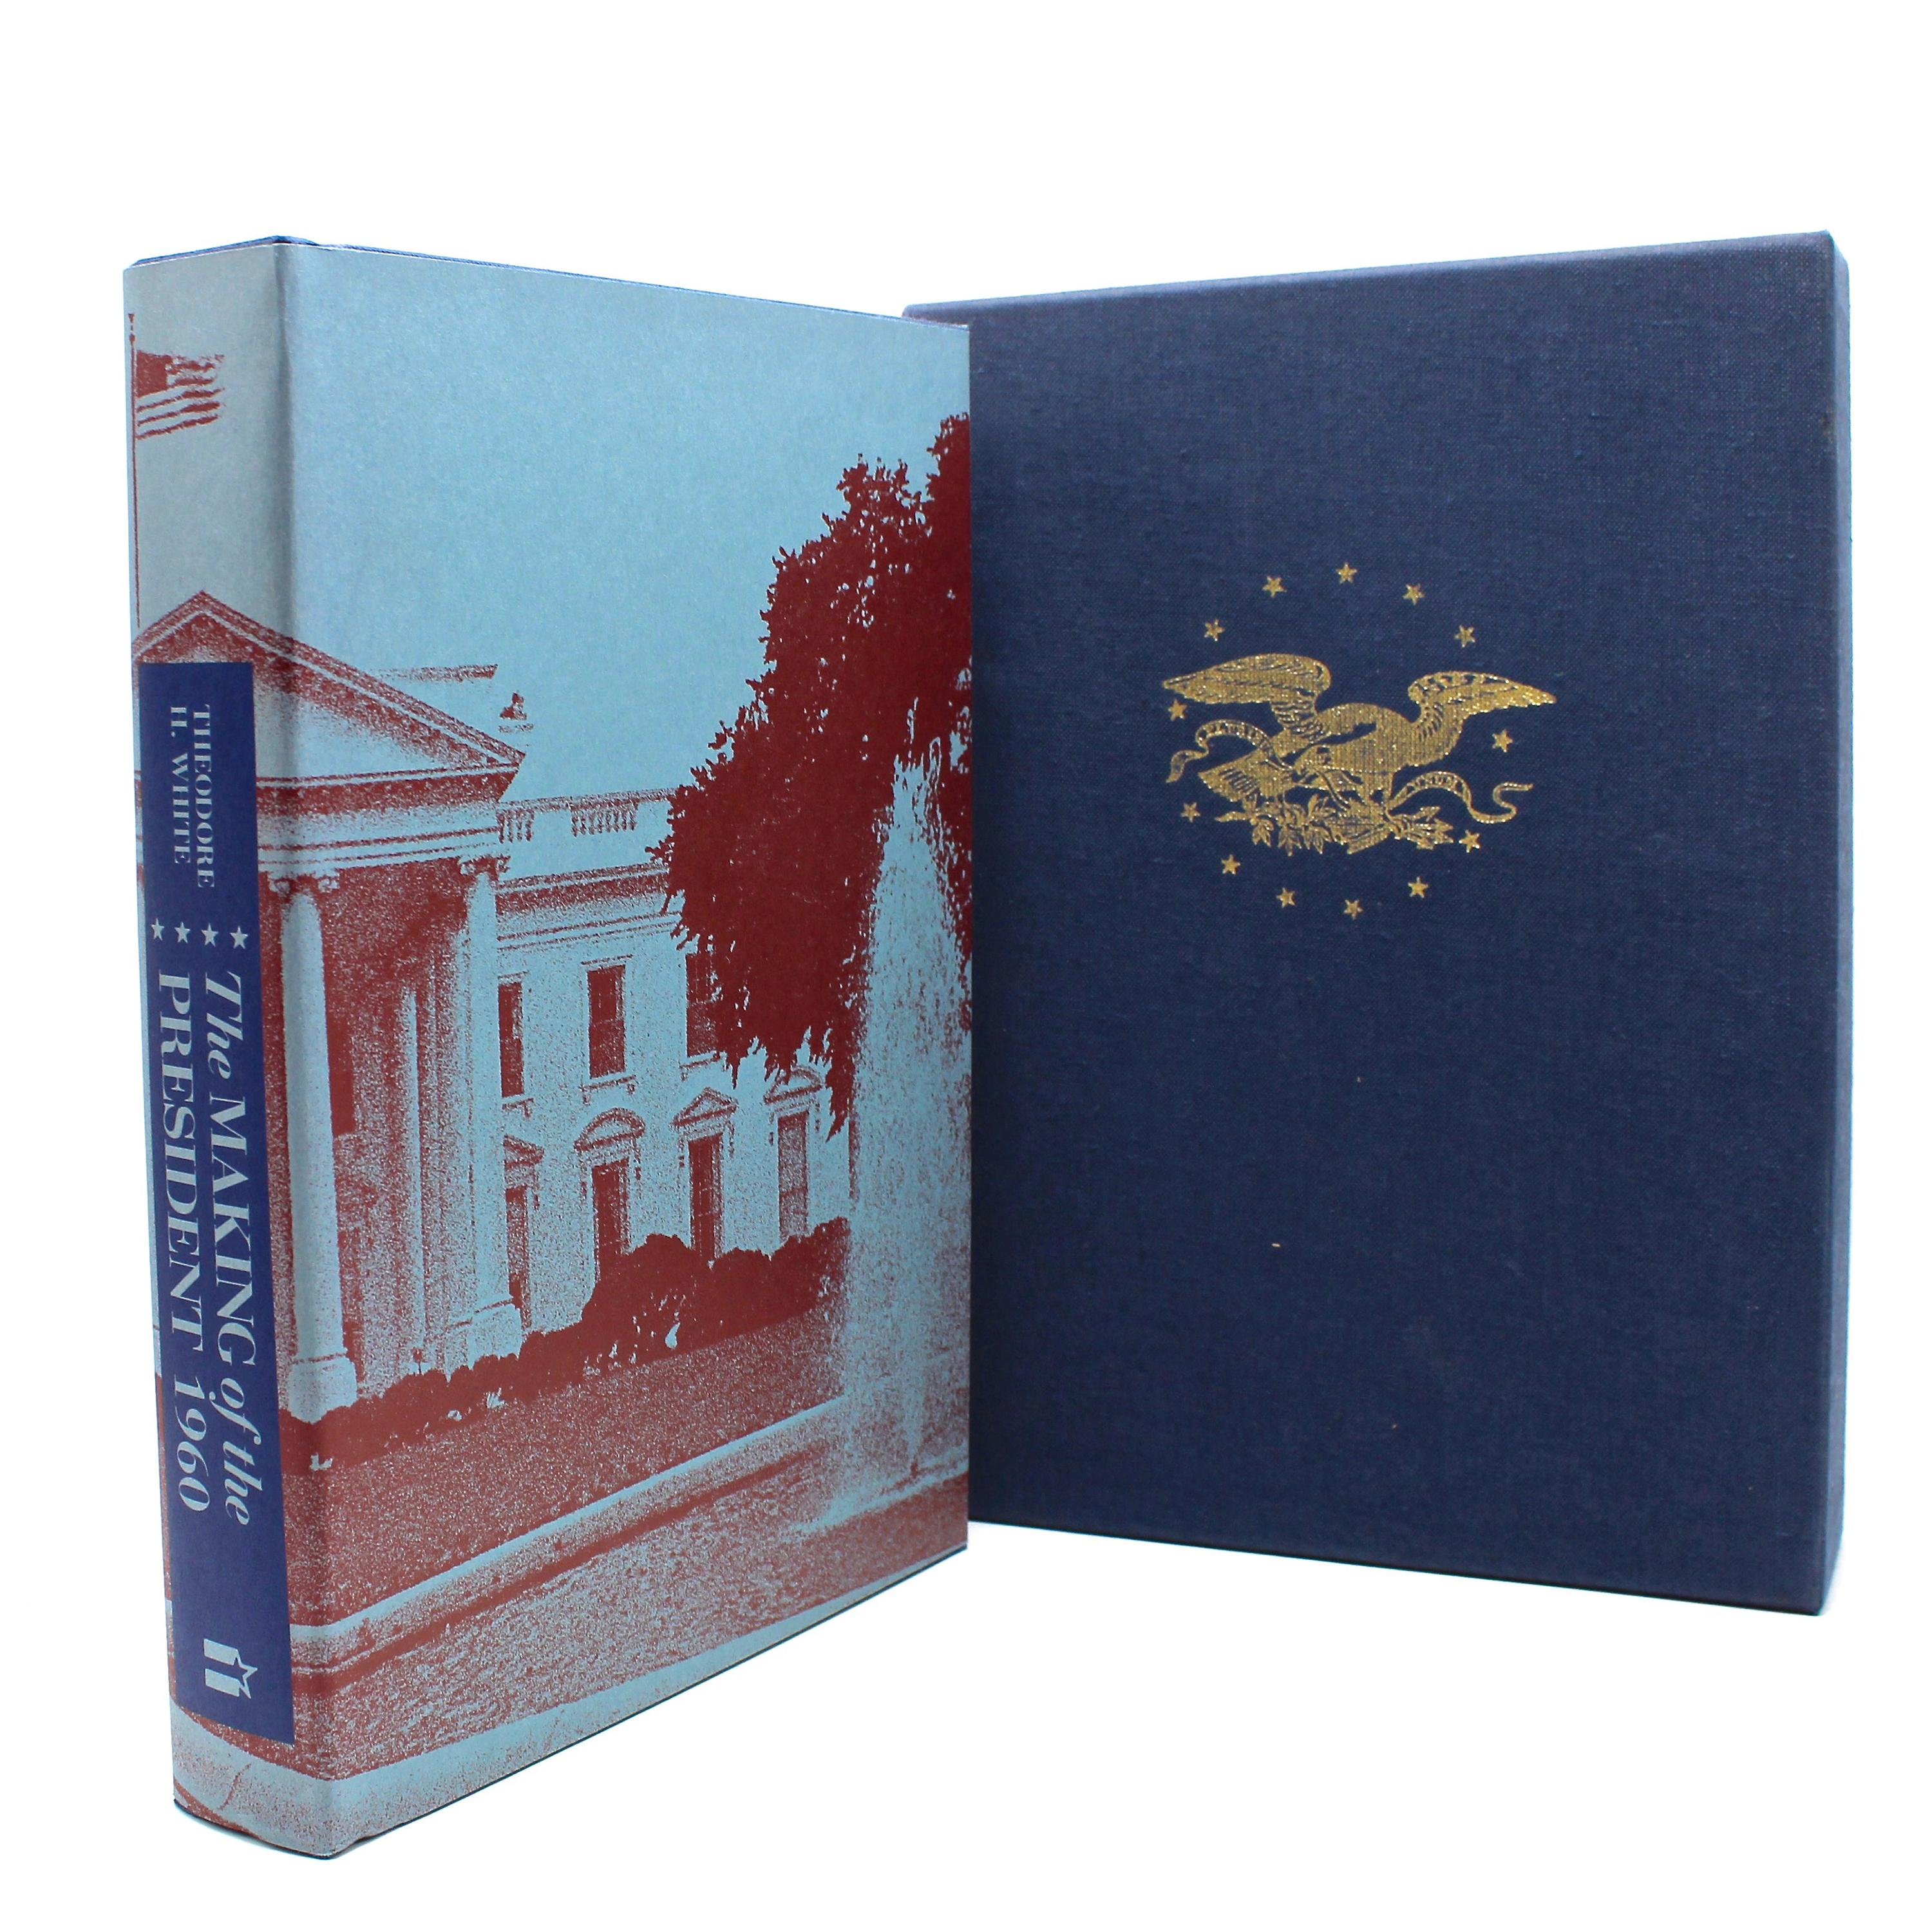 "Making of the President" by Theodore M. White, Book of the Month Edition, 1960